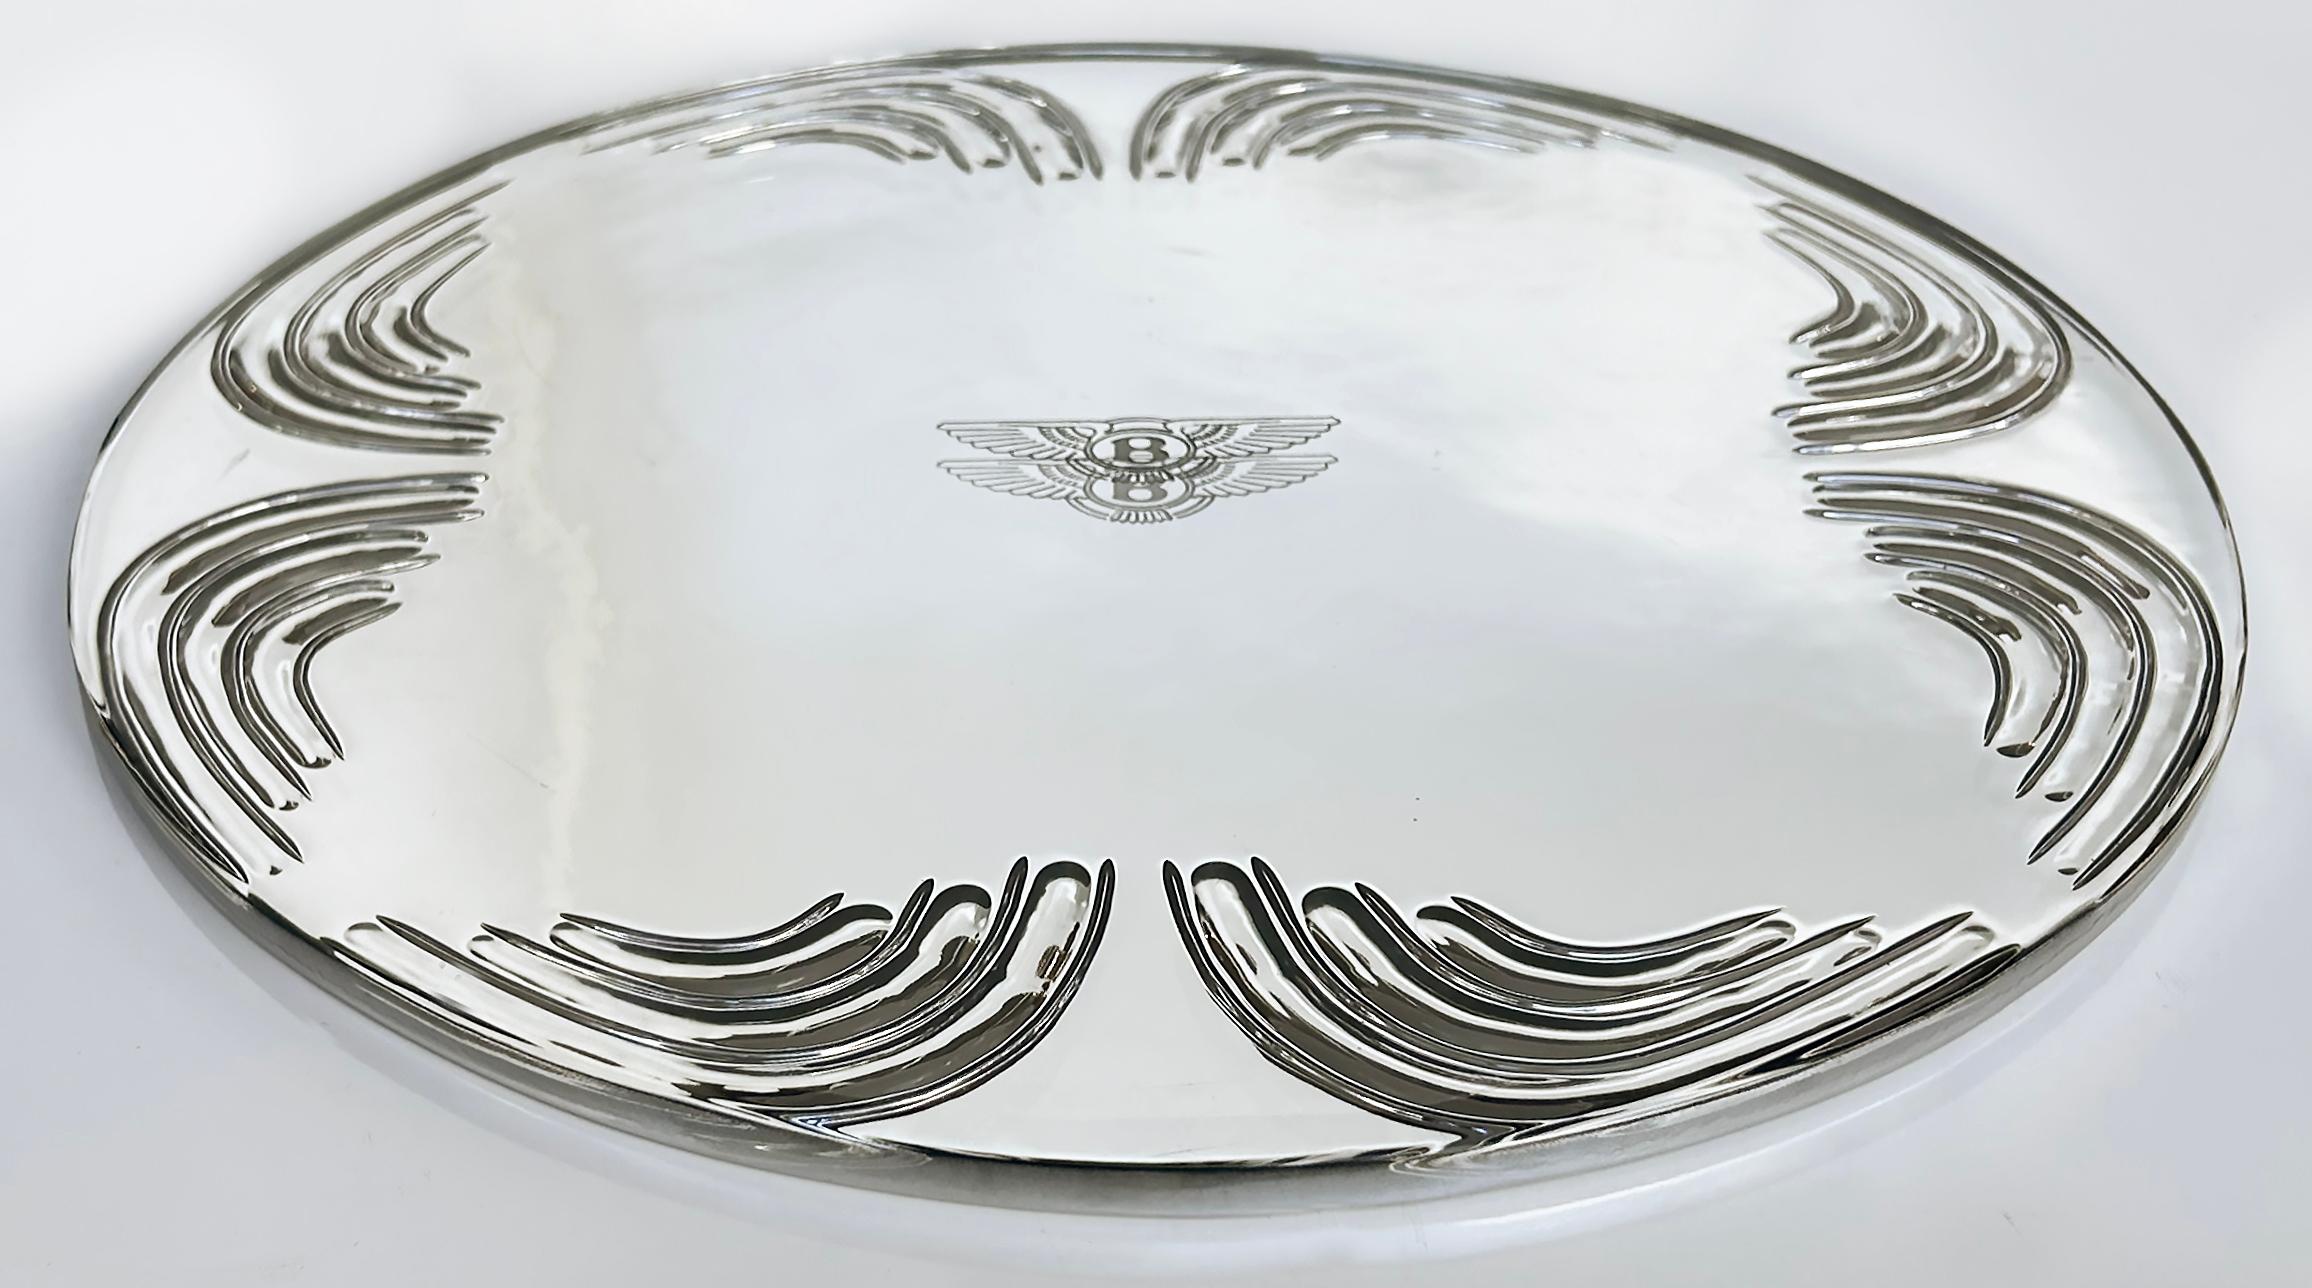 Contemporary Bentley Home Glass Coated Sterling Silver Chargers/Buffet Plate, Set of Six (6)